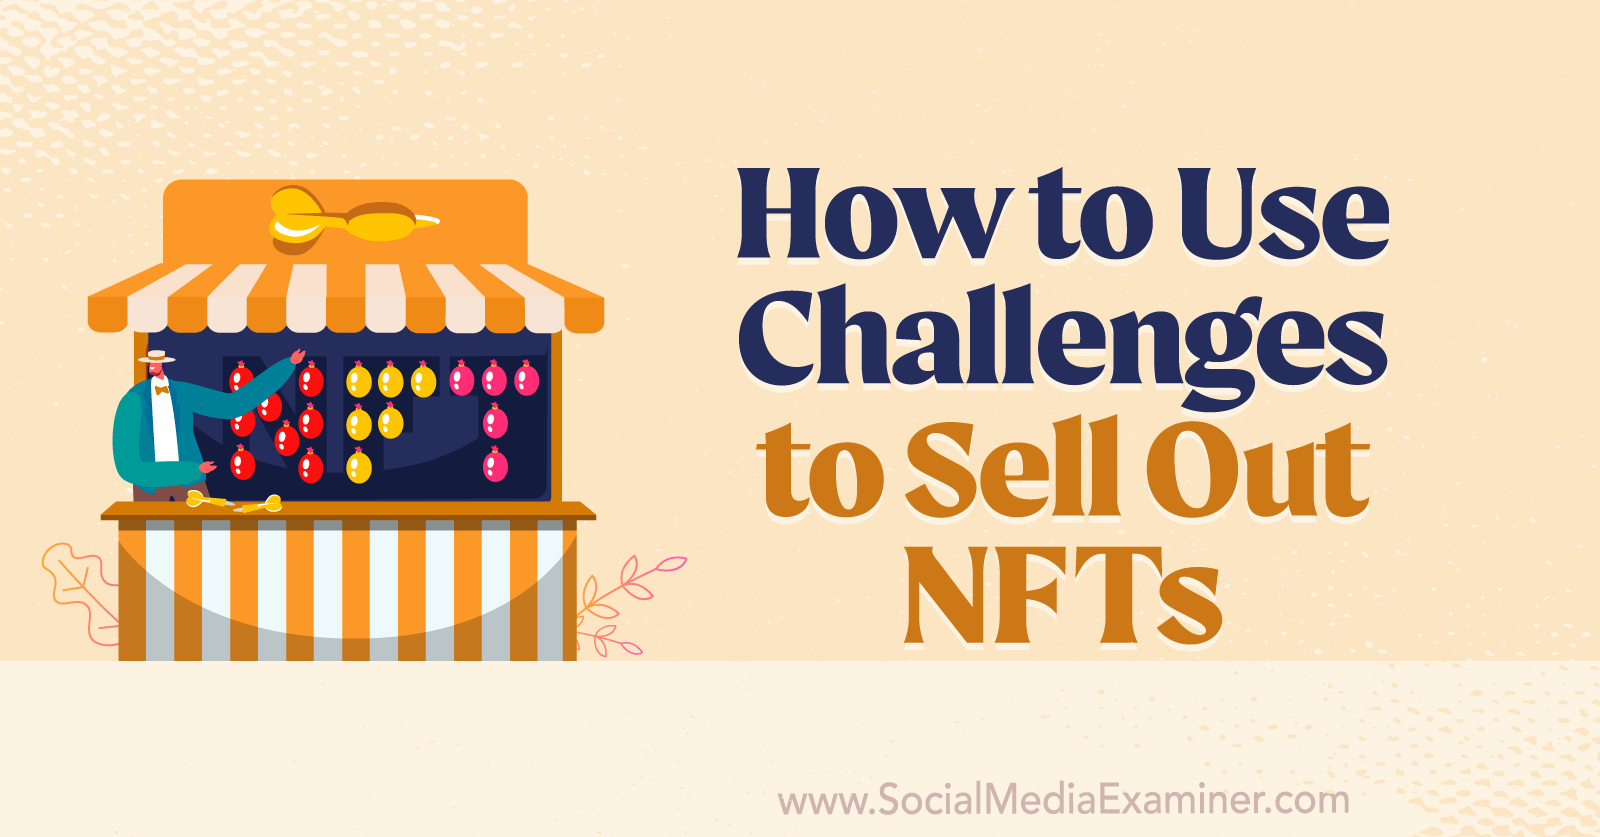 How to Use Challenges to Sell Out NFTs-Social Media Examiner